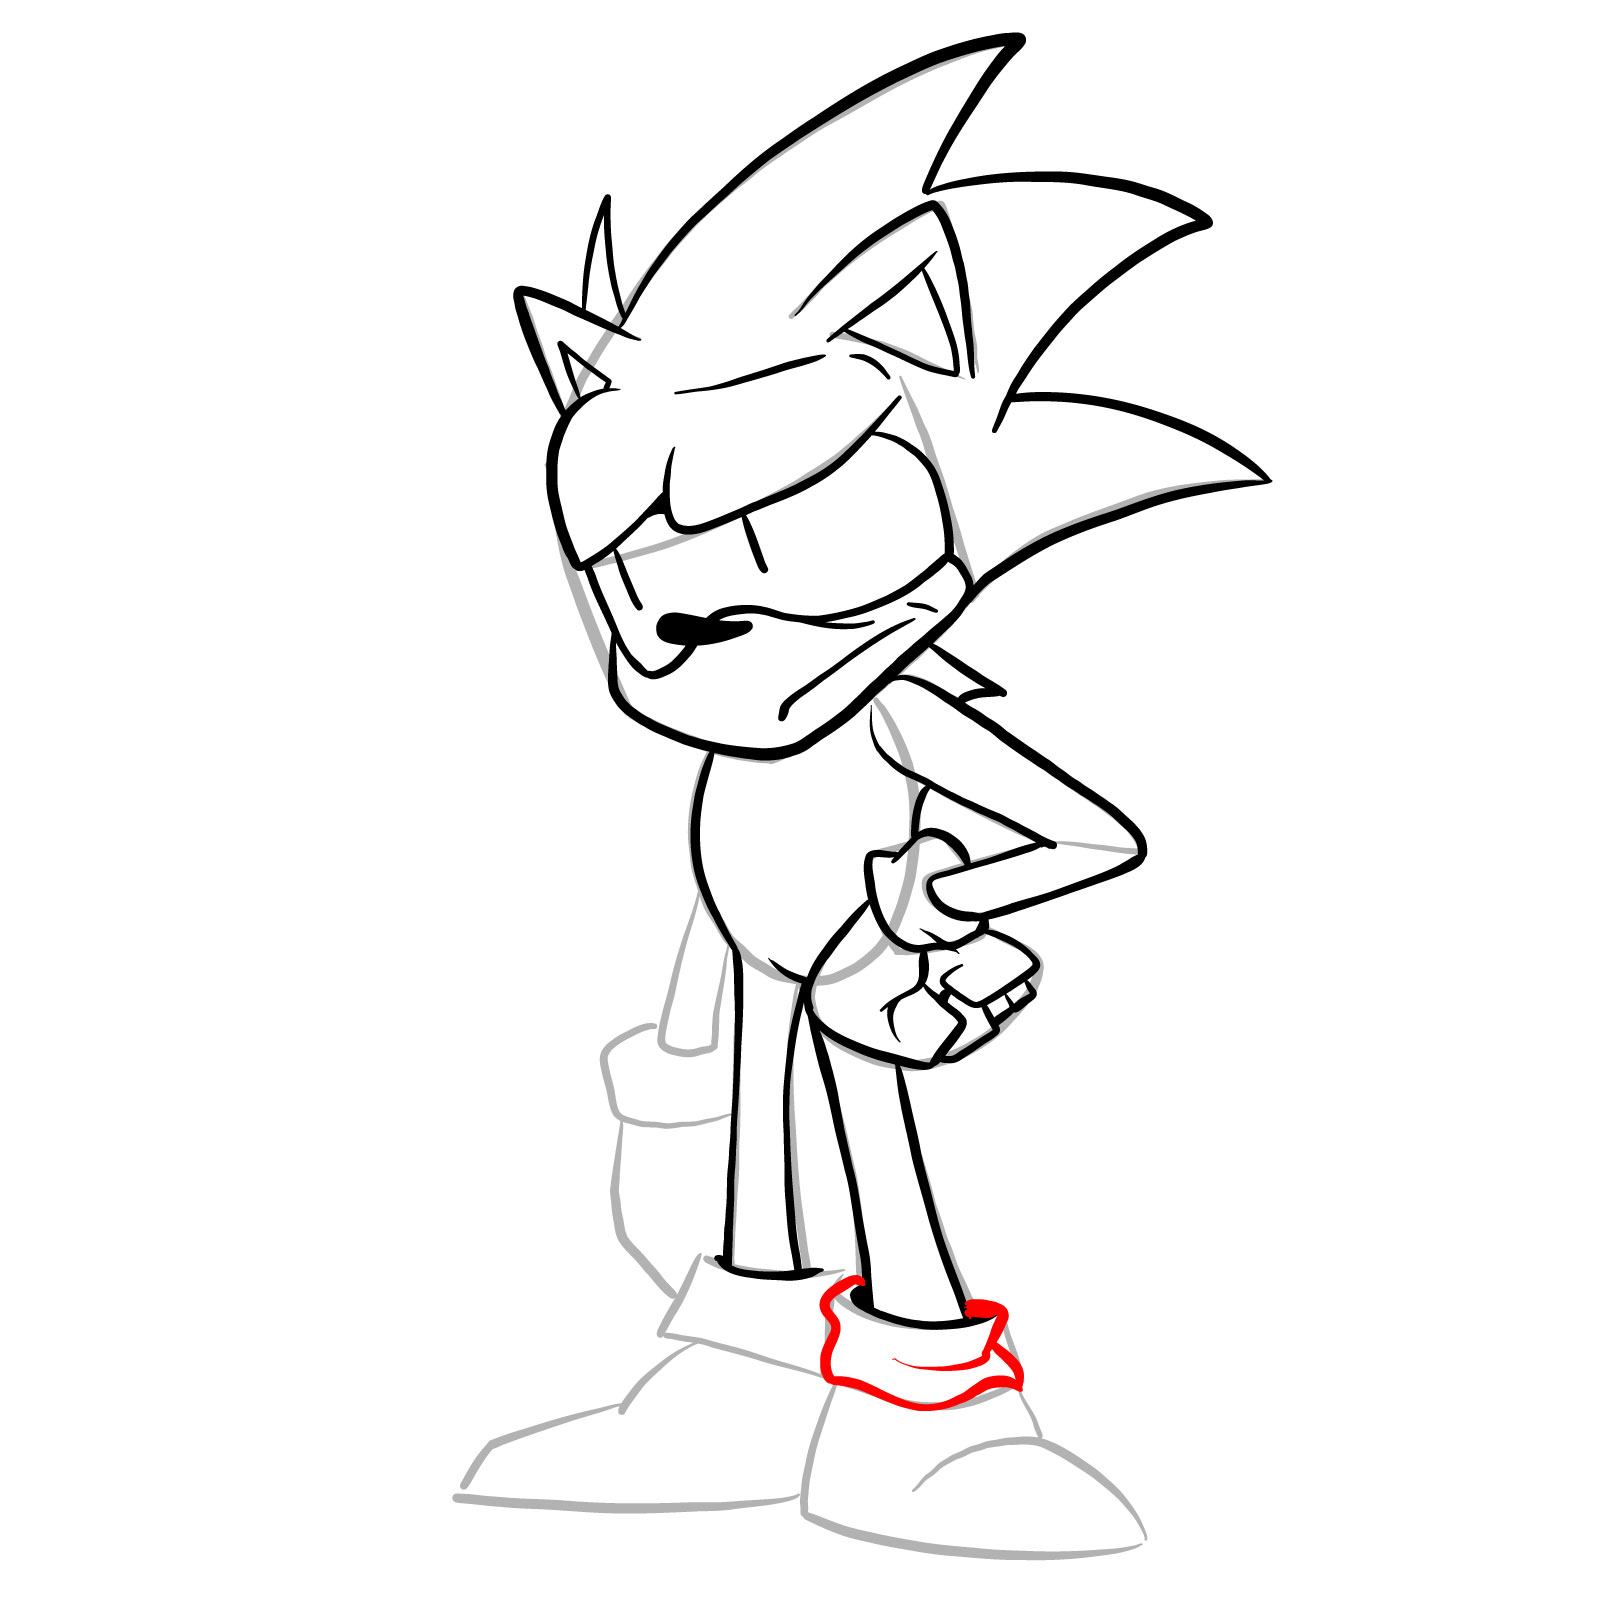 How to draw Sonic - FNF: Secret Histories - step 21